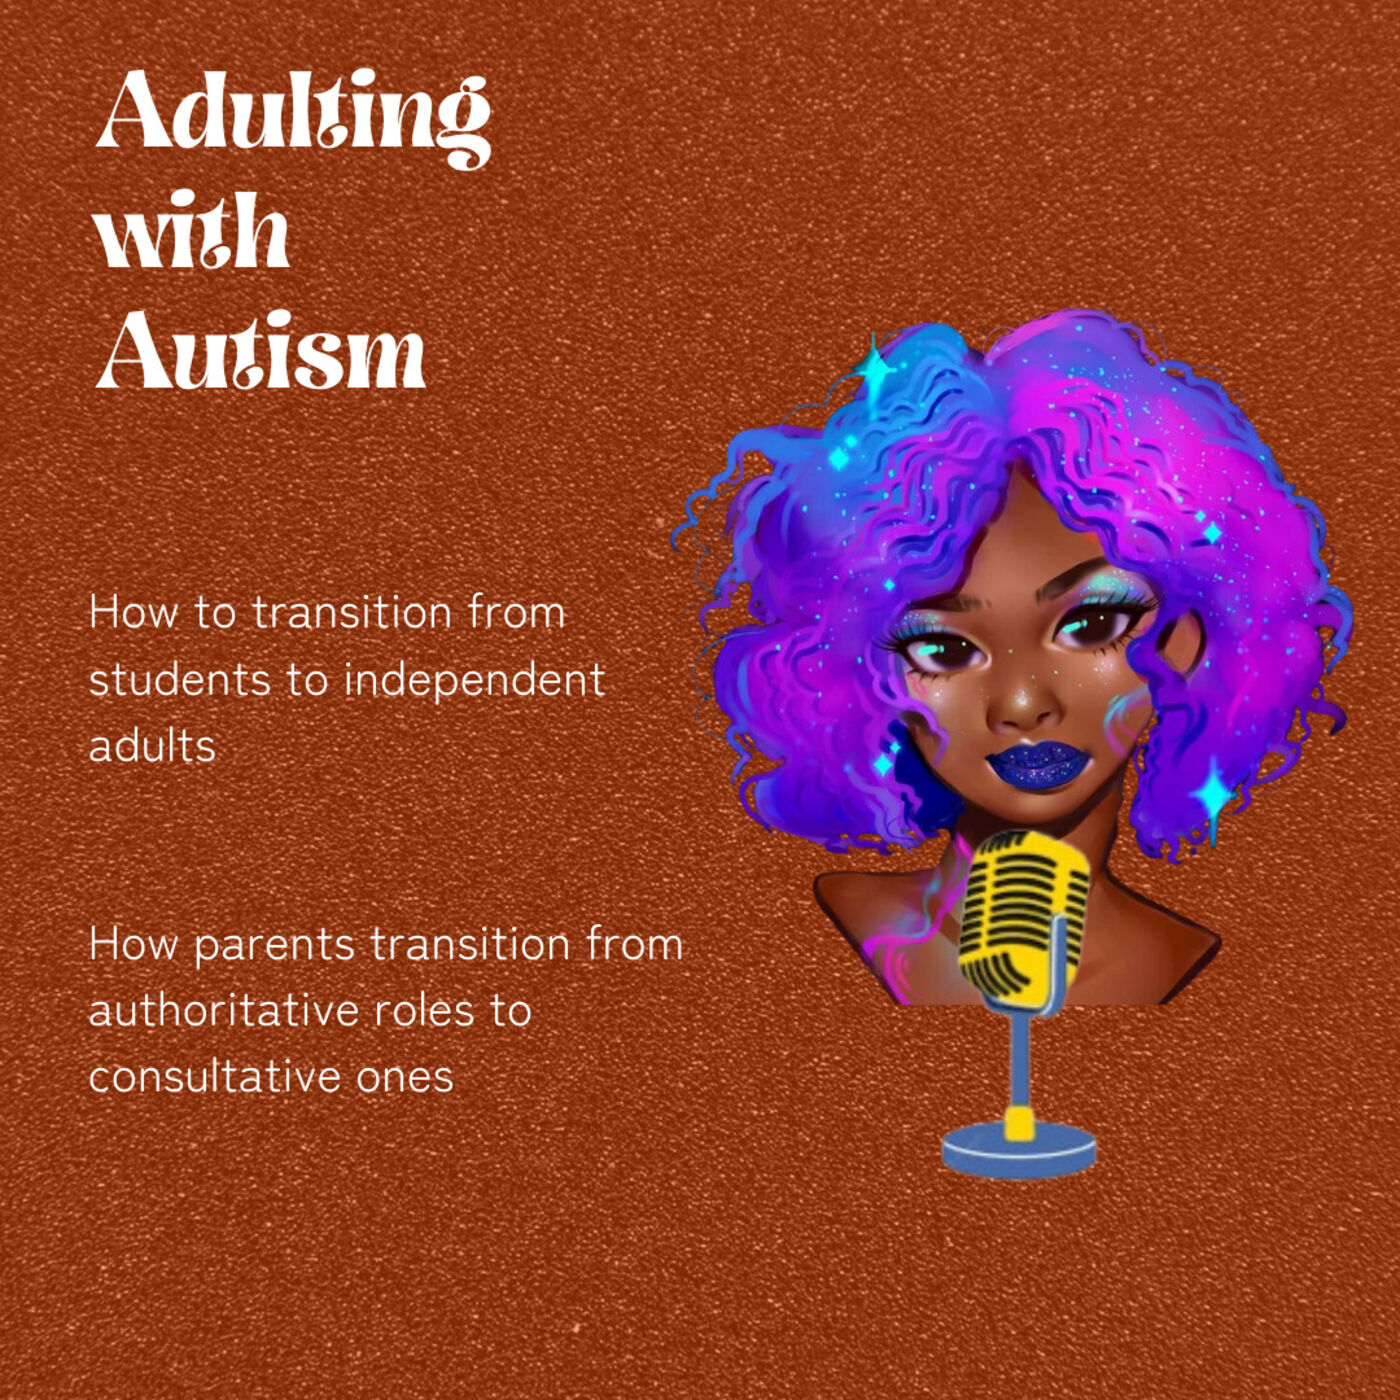 Adulting with Autism